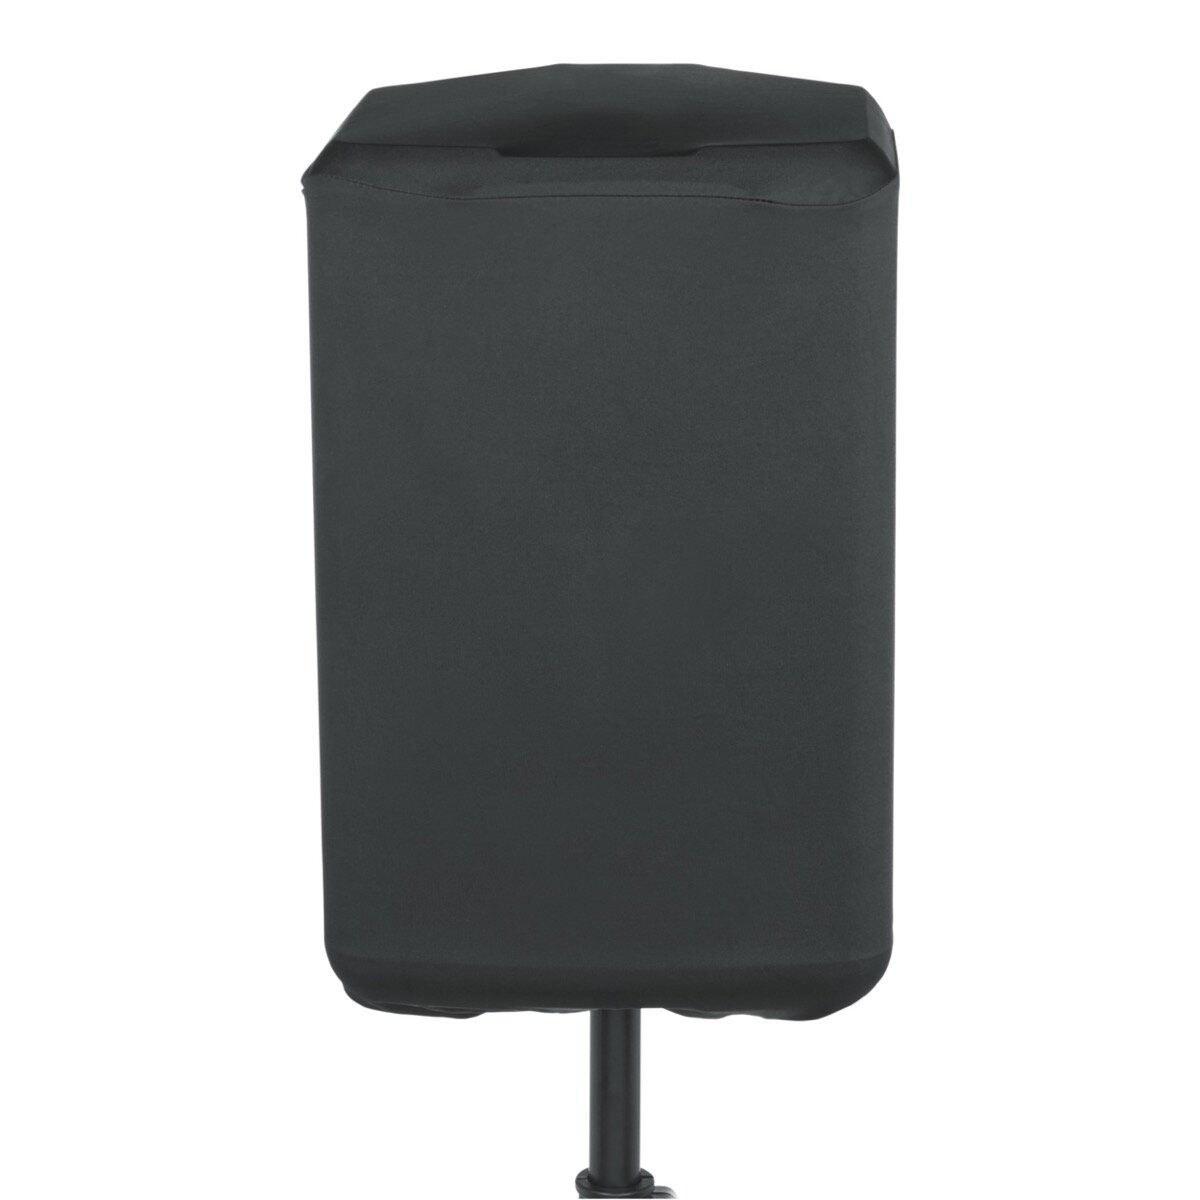 JBL BAGS EON ONE Compact Stretchy Cover Black -  EONONECOMPACT-STRETC